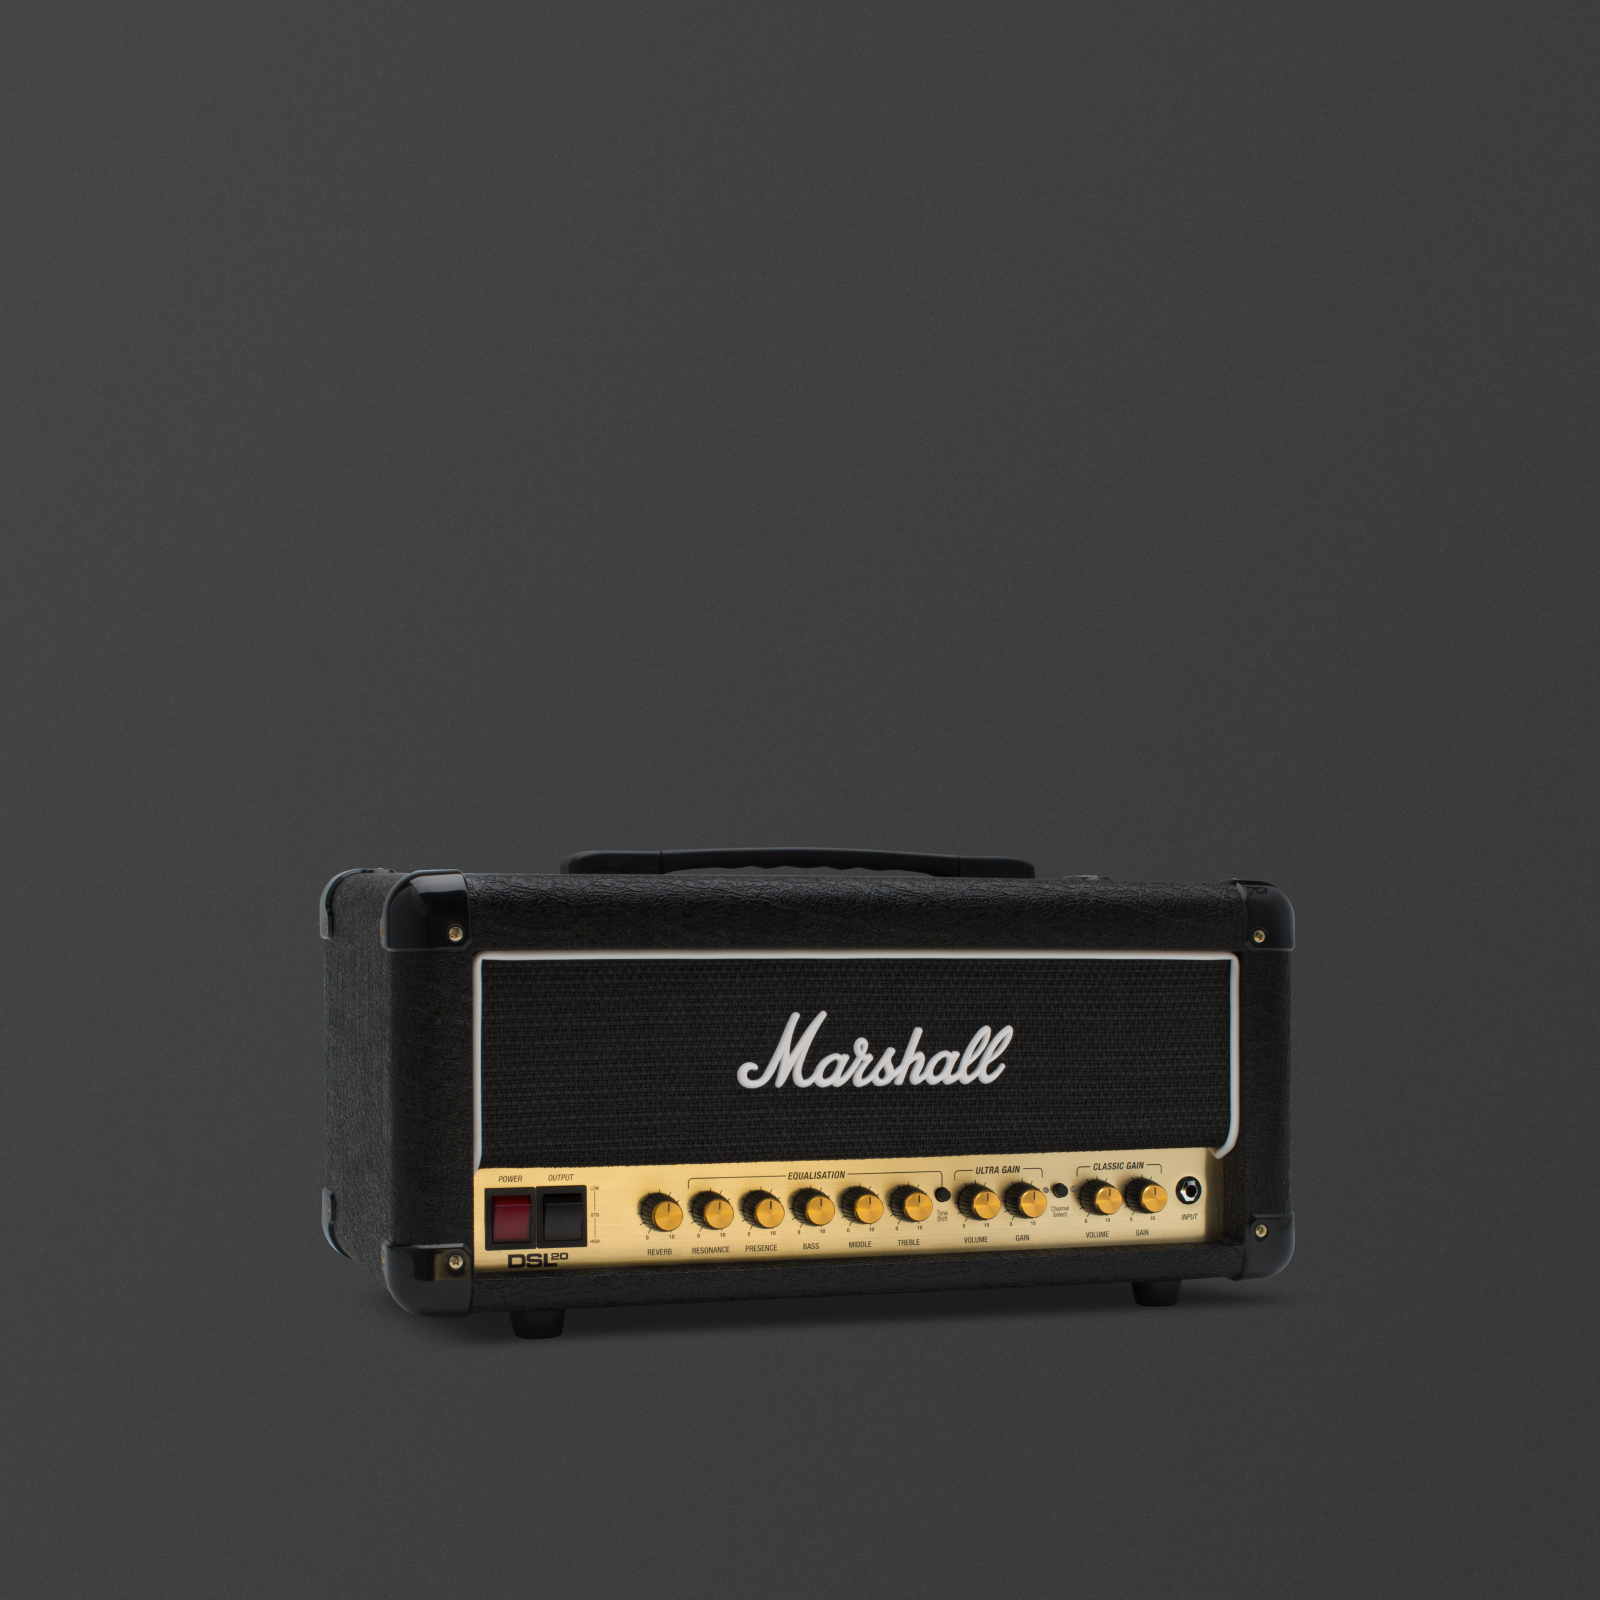 Slightly angled image of the front of the Marshall DSL20 Head amplifier. 